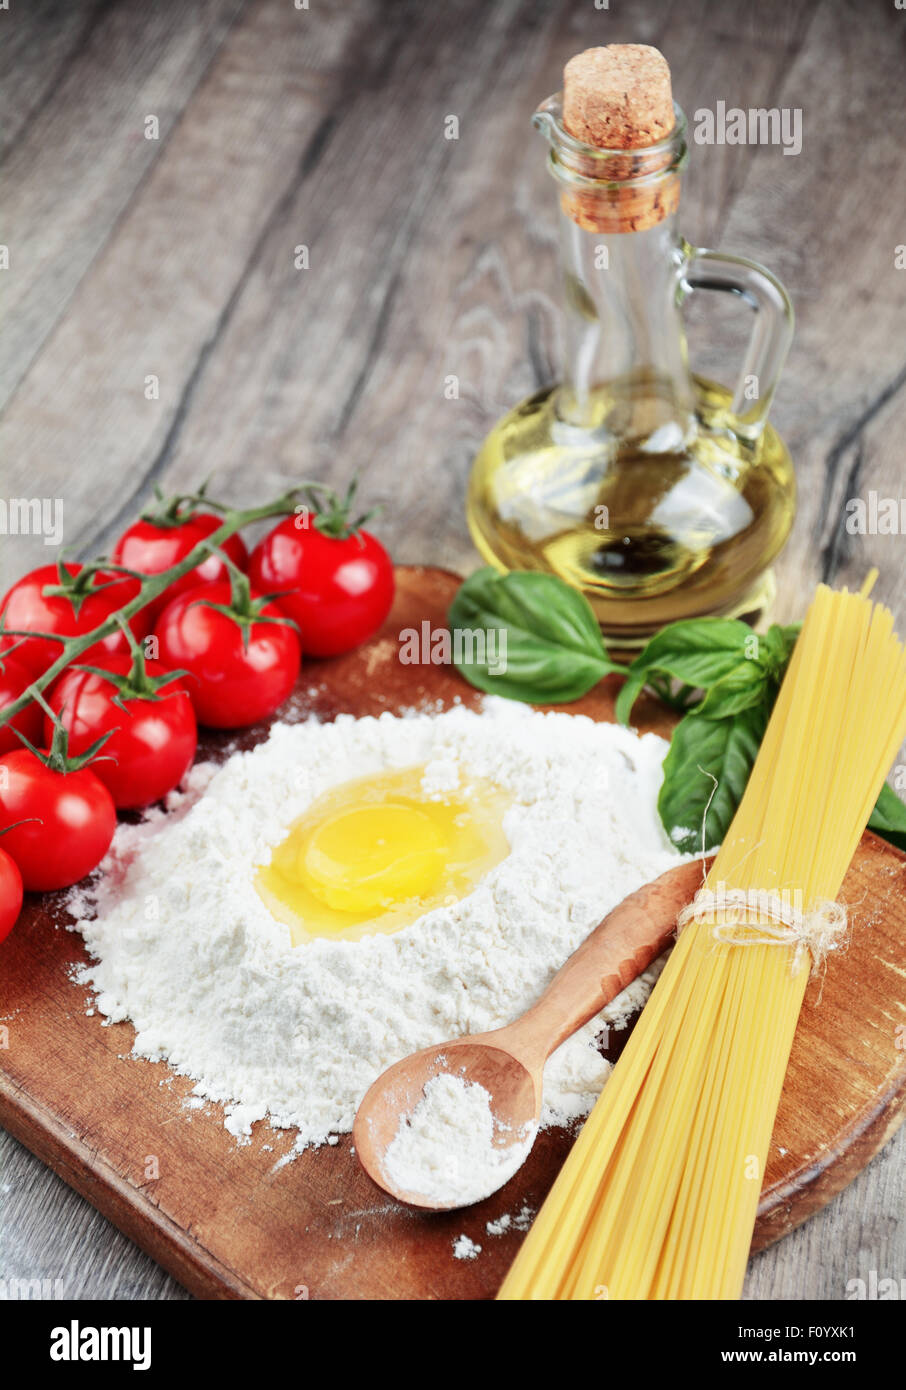 Preparing pasta on the wooden table Stock Photo